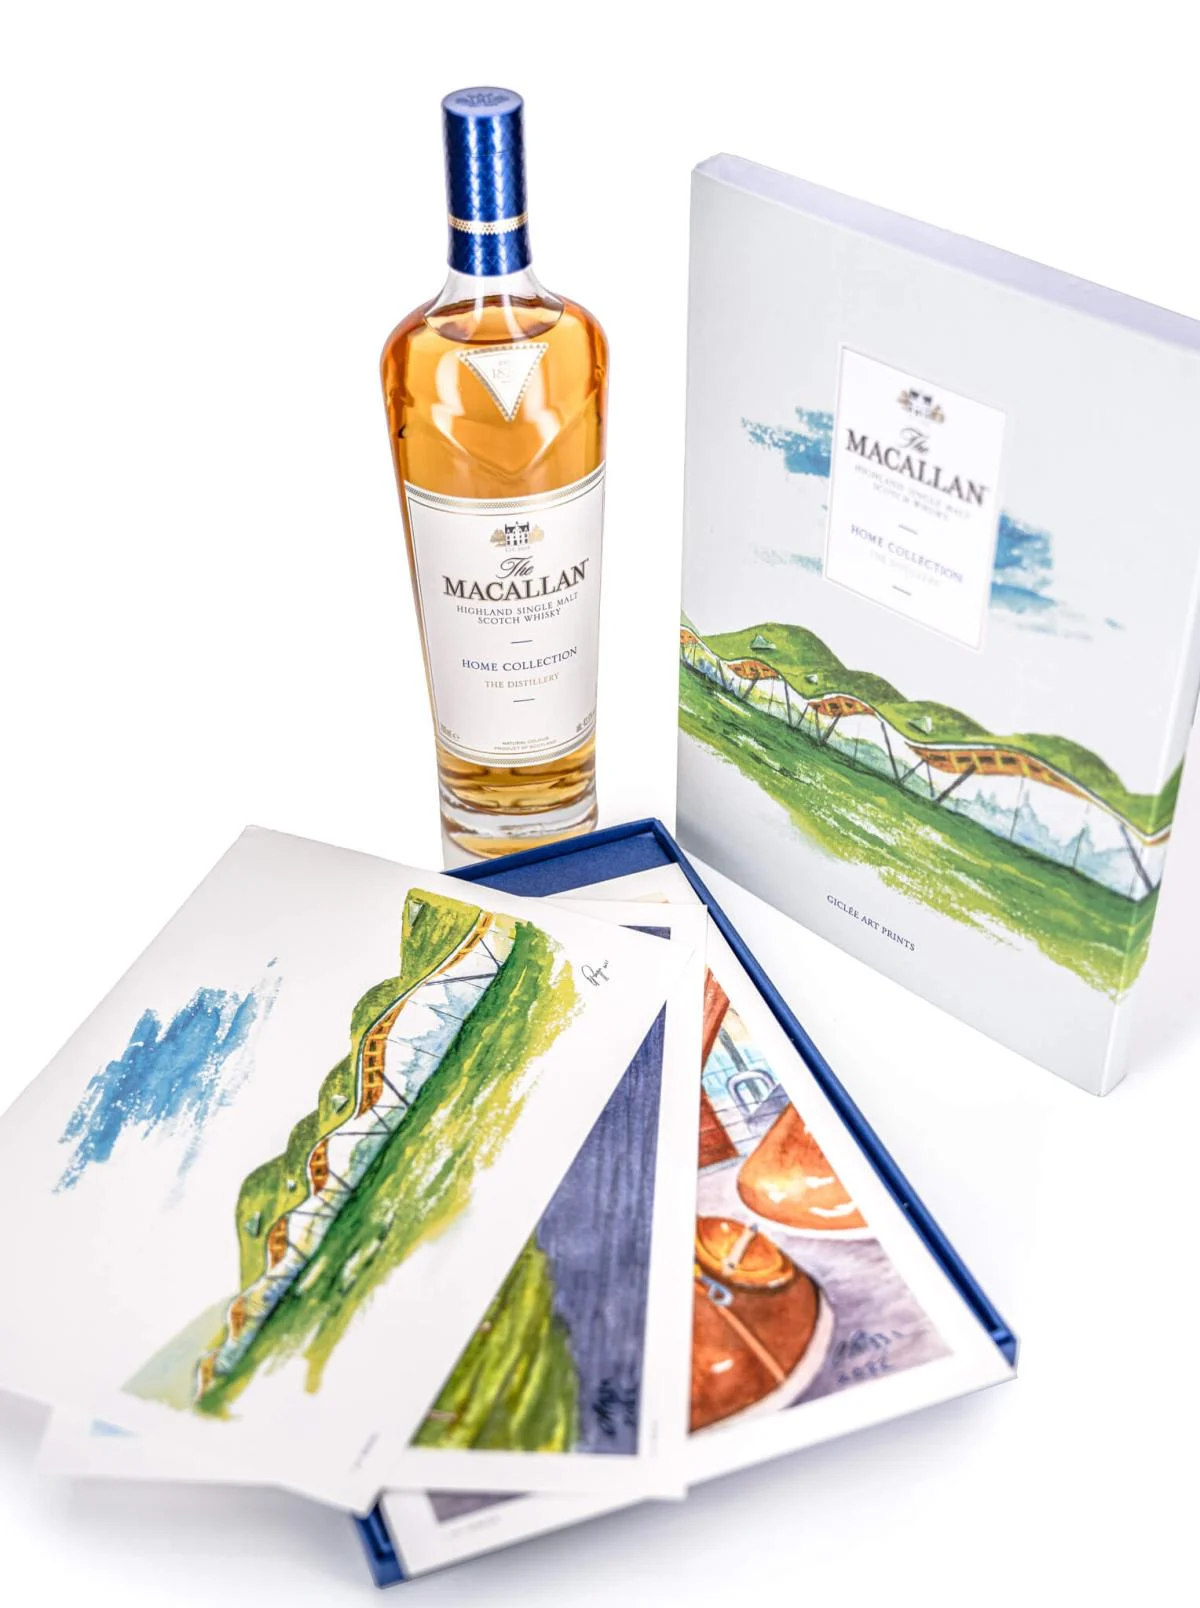 The Macallan Home Collection was released in September 2022 and is a good example of a bottle that went up in value very quickly on the secondary market.